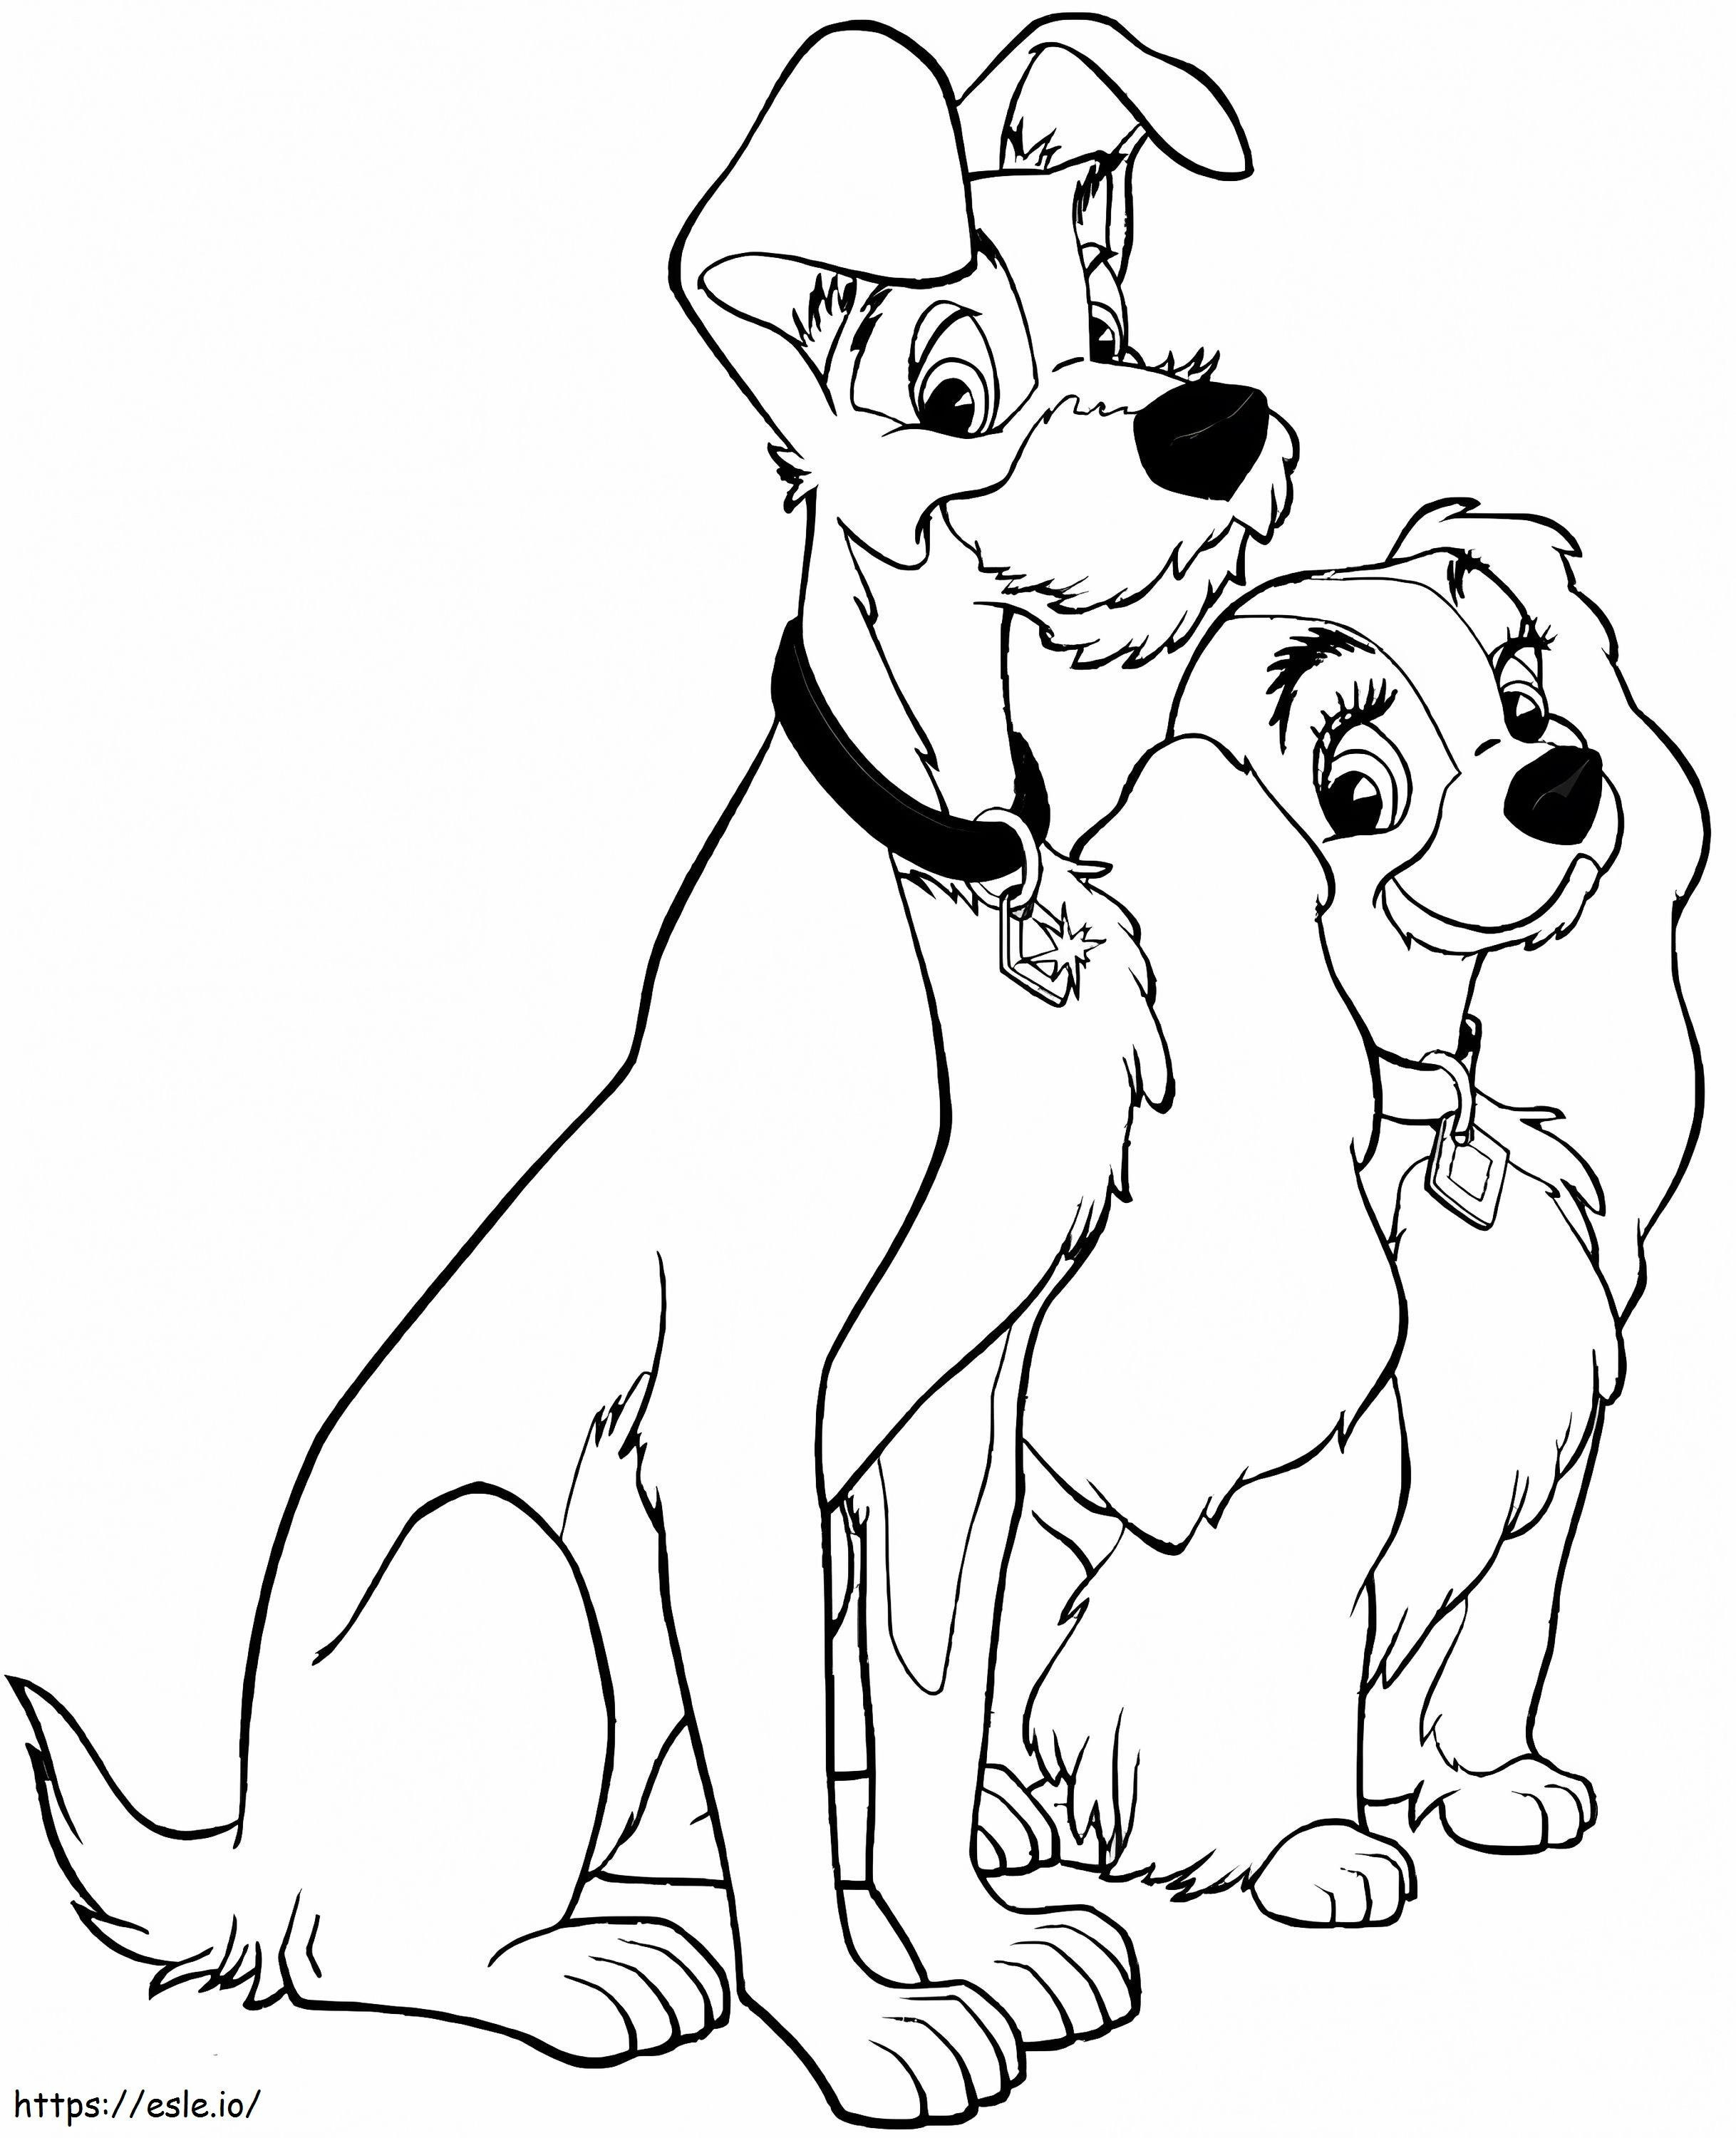 1552894189 Coloring For Kids The Lady And The Tramp 35852 coloring page